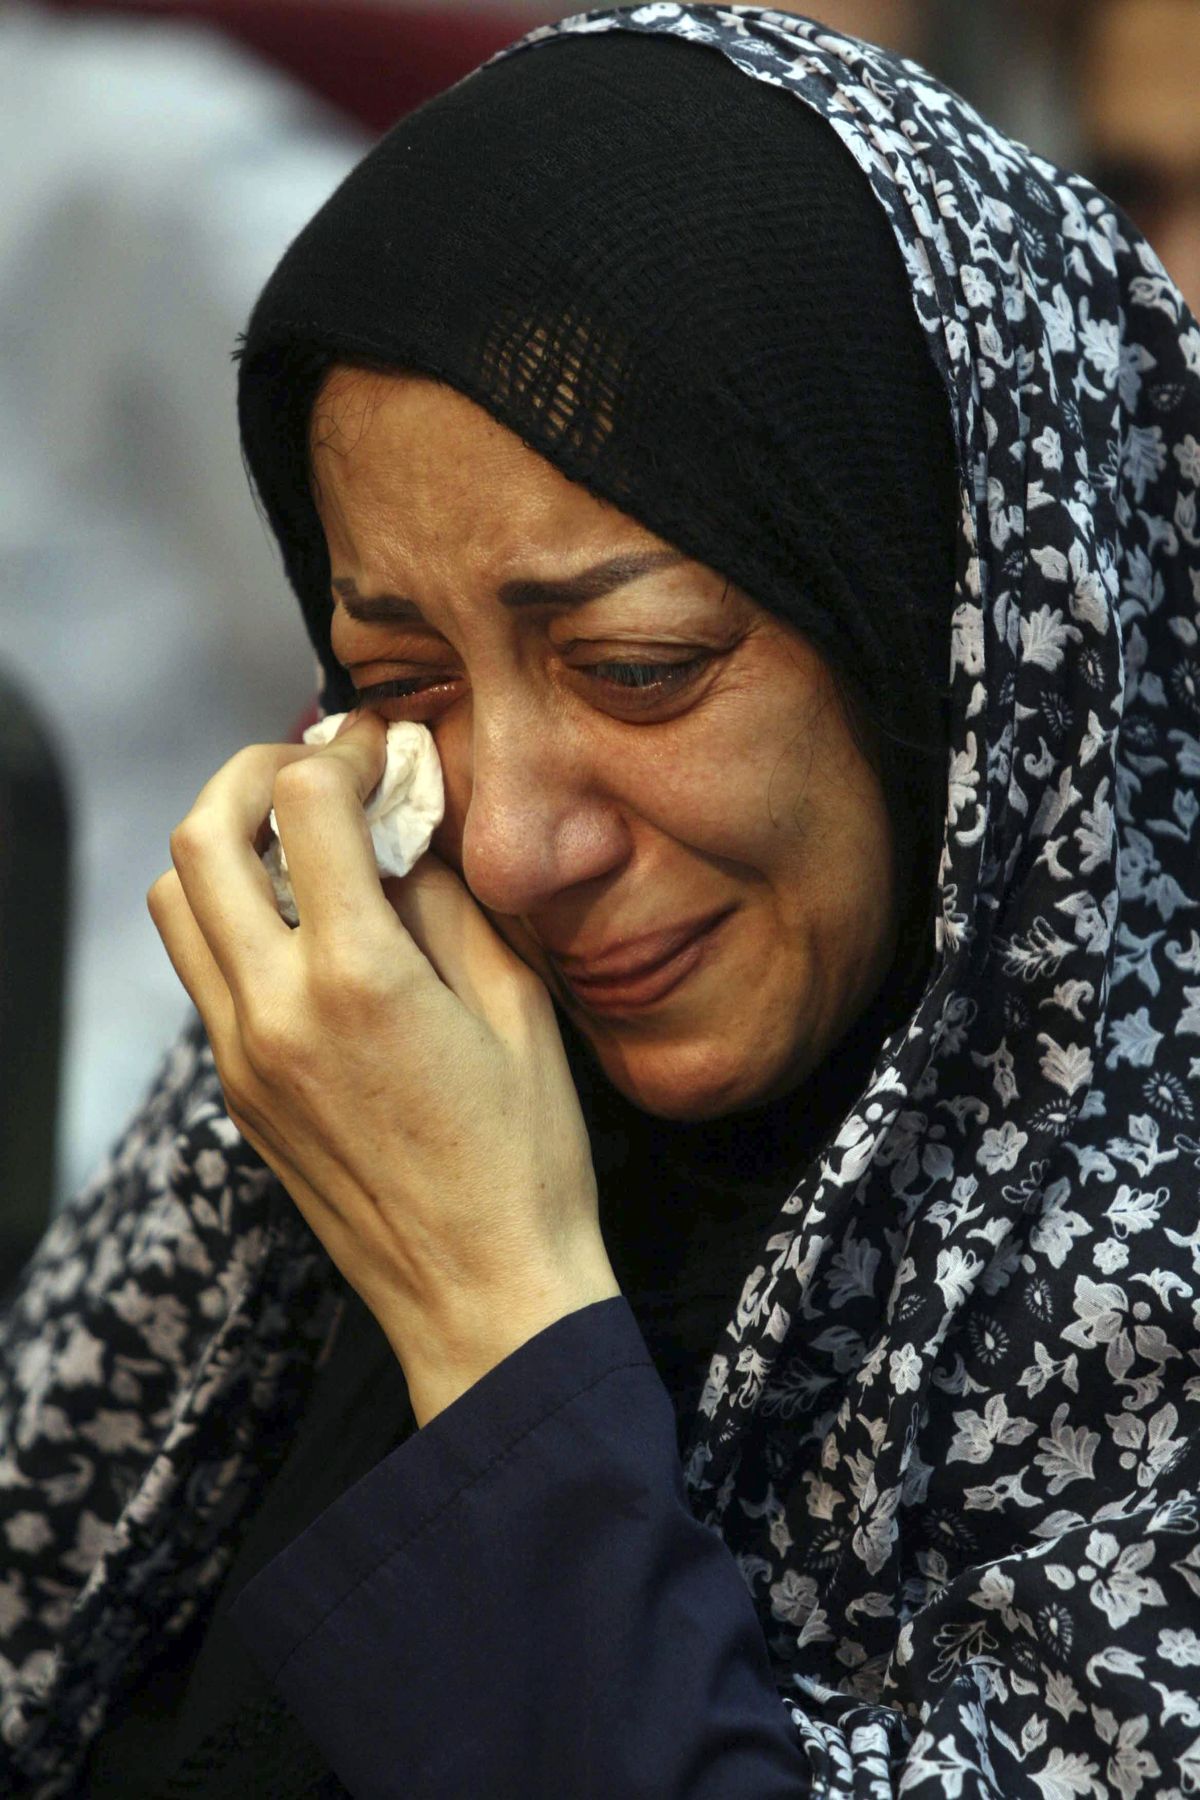 French Embassy staff member Nazak Afshar weeps in court  during her trial Saturday. (Hanif Shoaee / The Spokesman-Review)